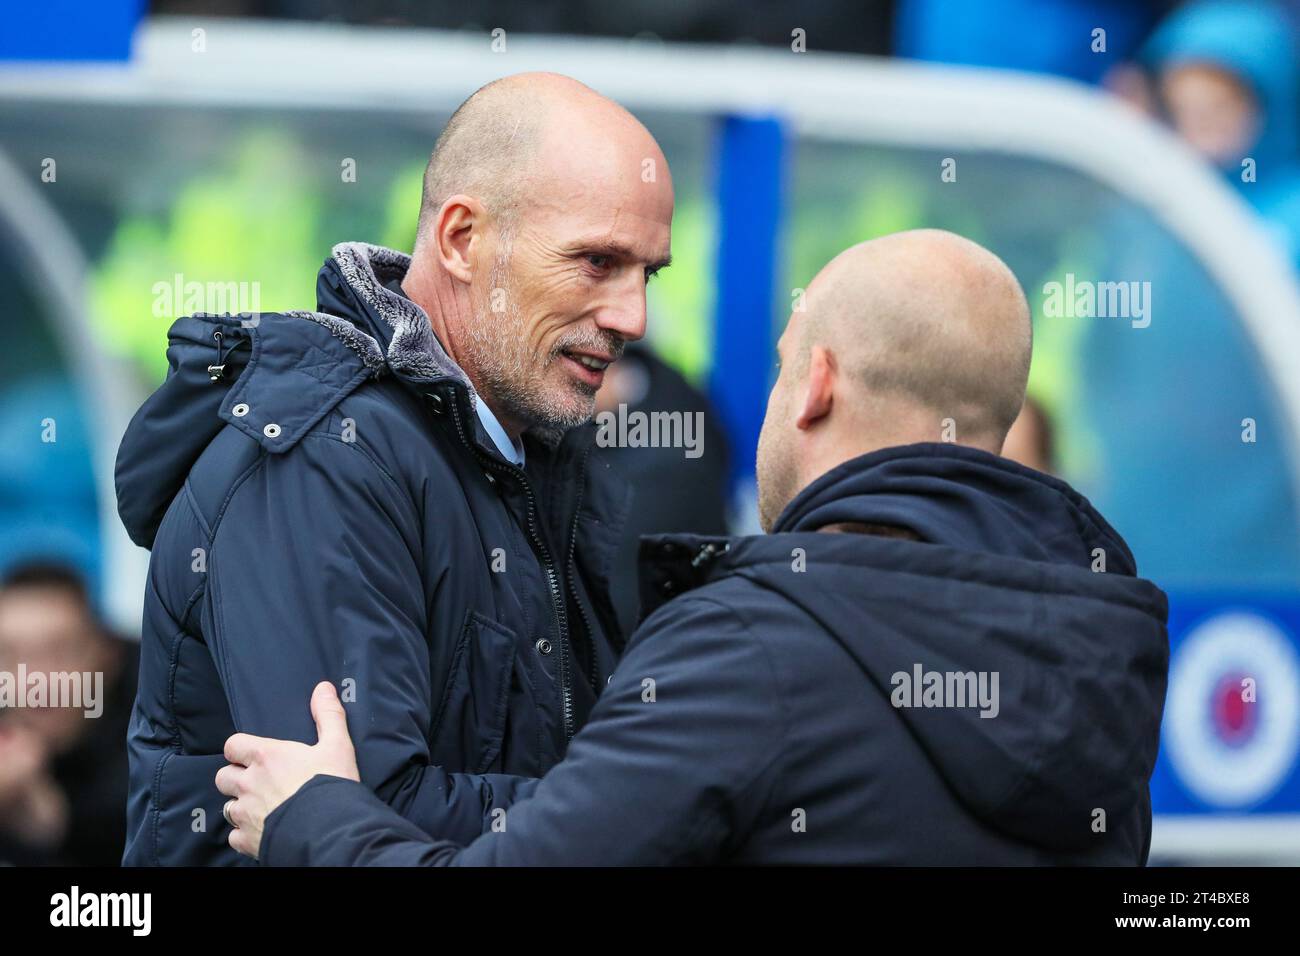 PHILIPPE CLEMENT, manager of Rangers FC, greeting STEVEN NAISMITH, manager of Heart of Midlothian FC, before a Scottish Premiership football match at Stock Photo